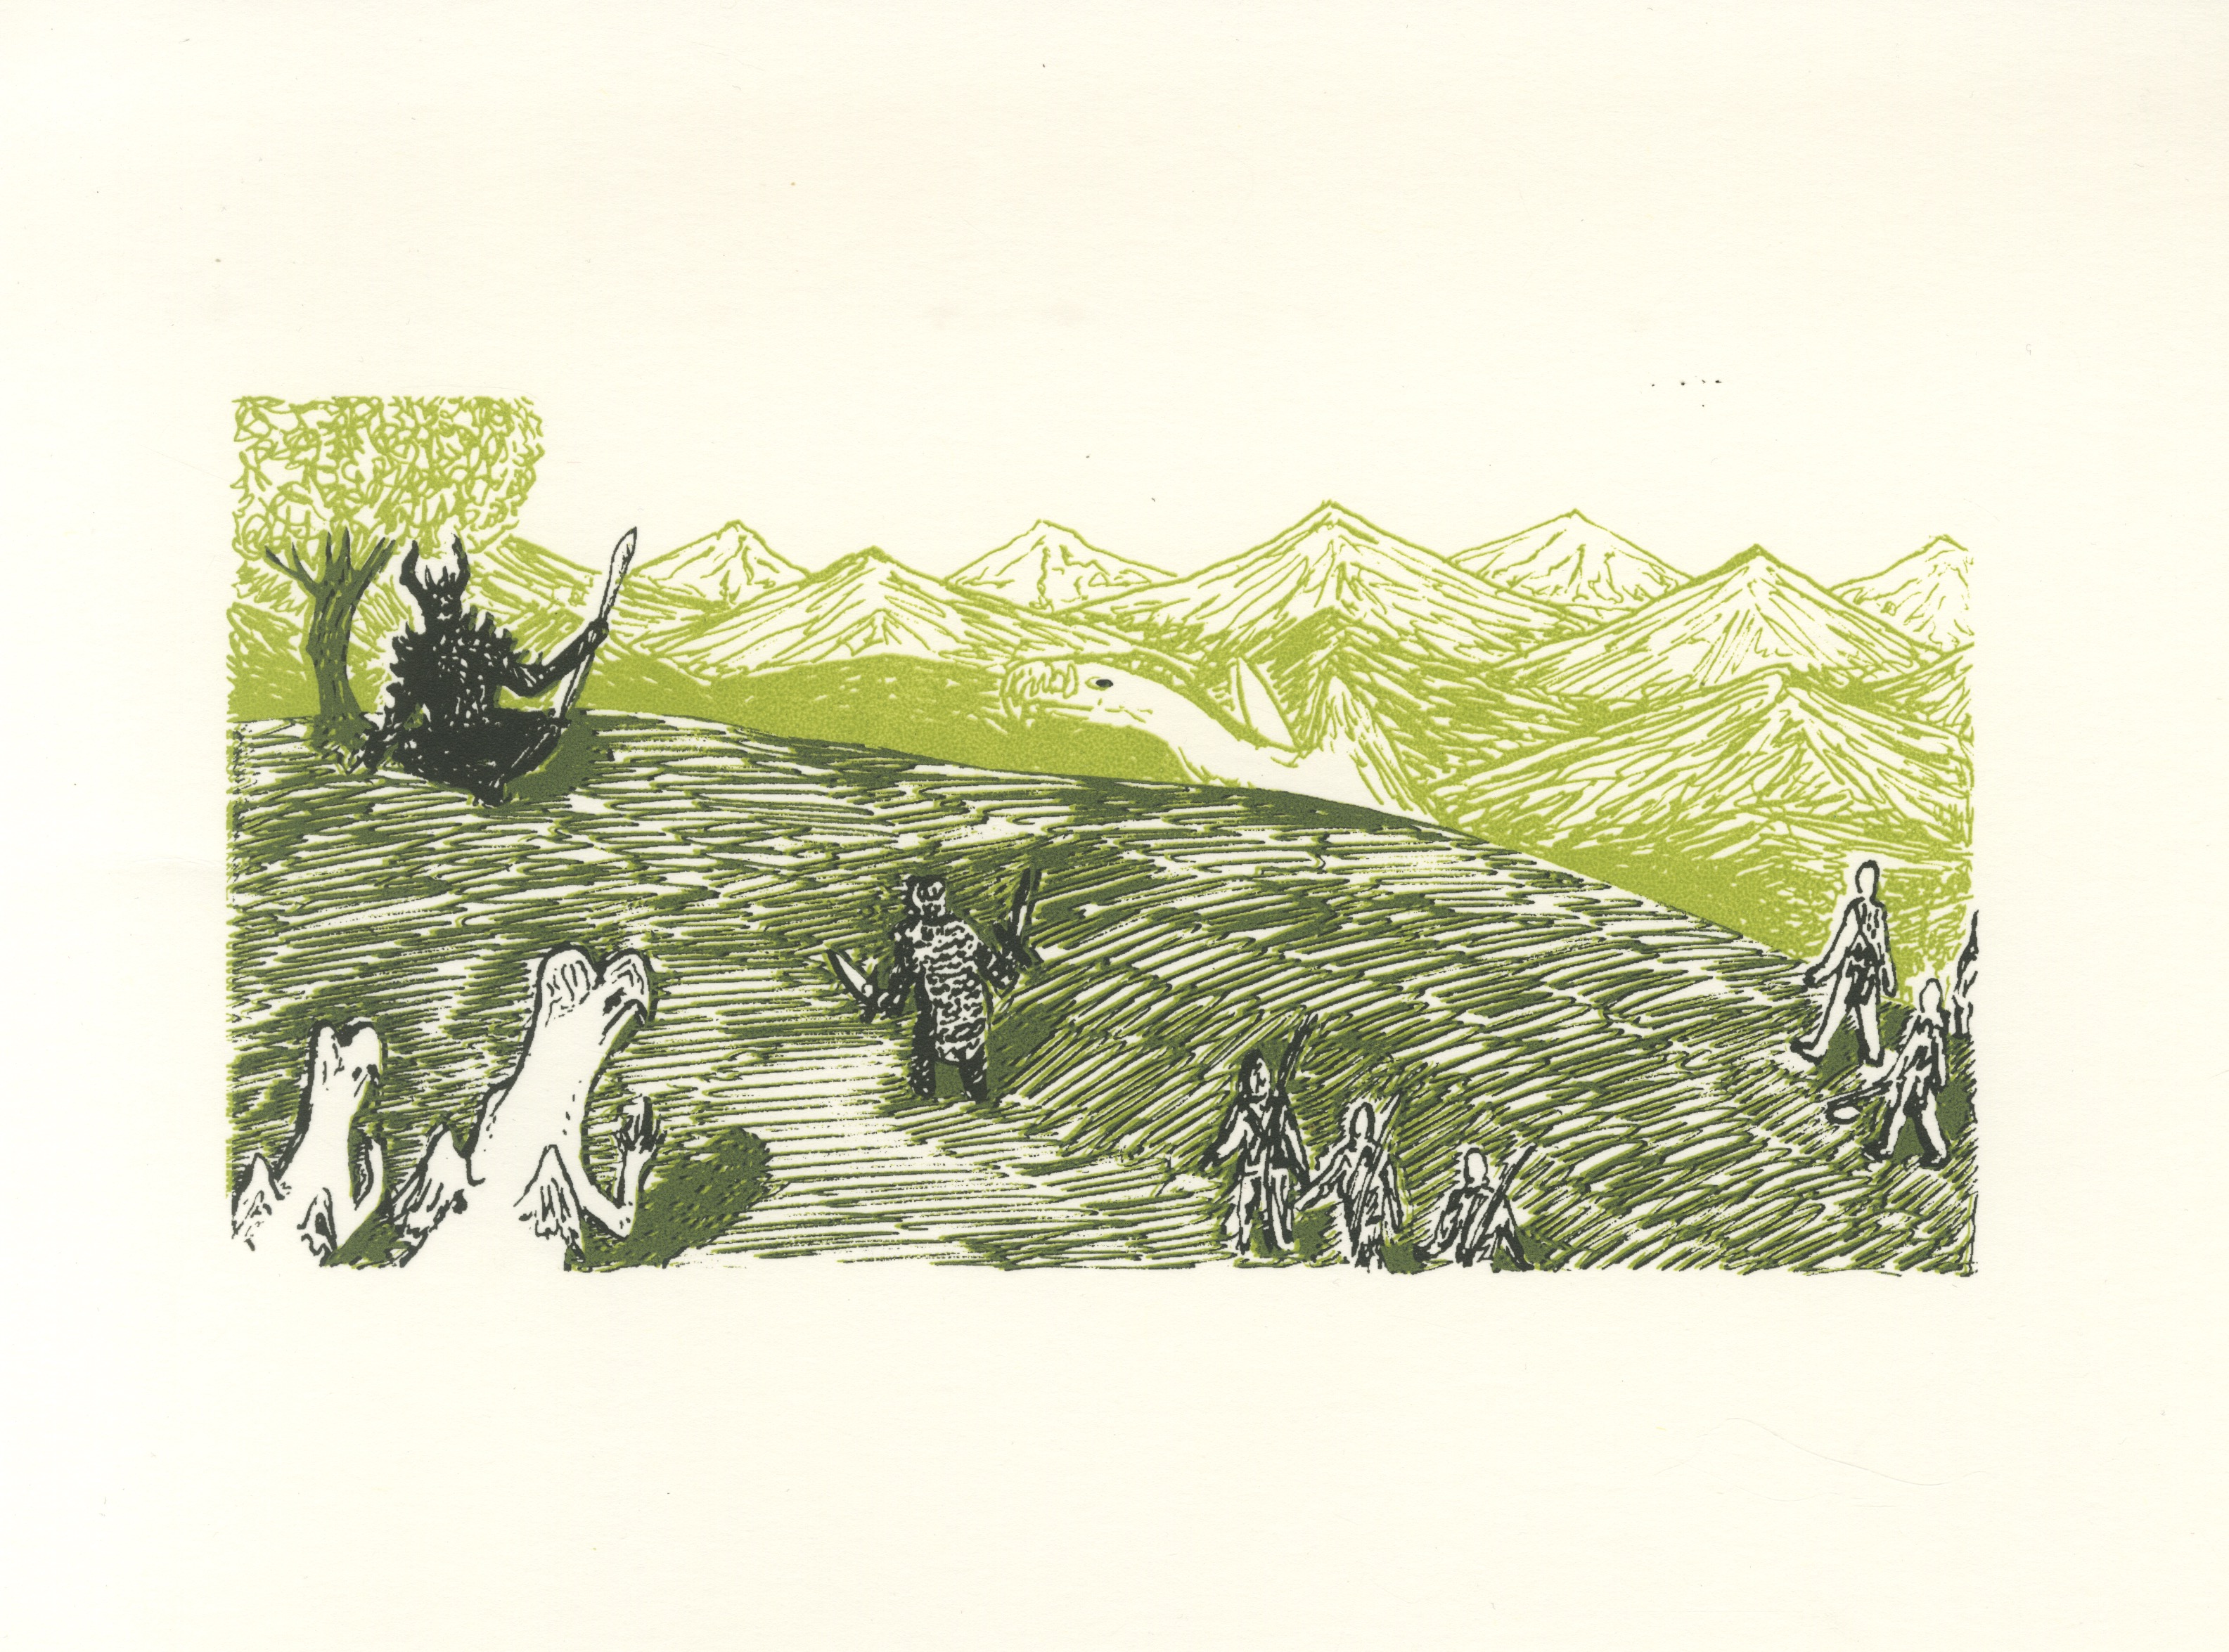 A screen-print in green and dark grey, showing a wide variety of creatures ascending a hill to another, already seated at the top.